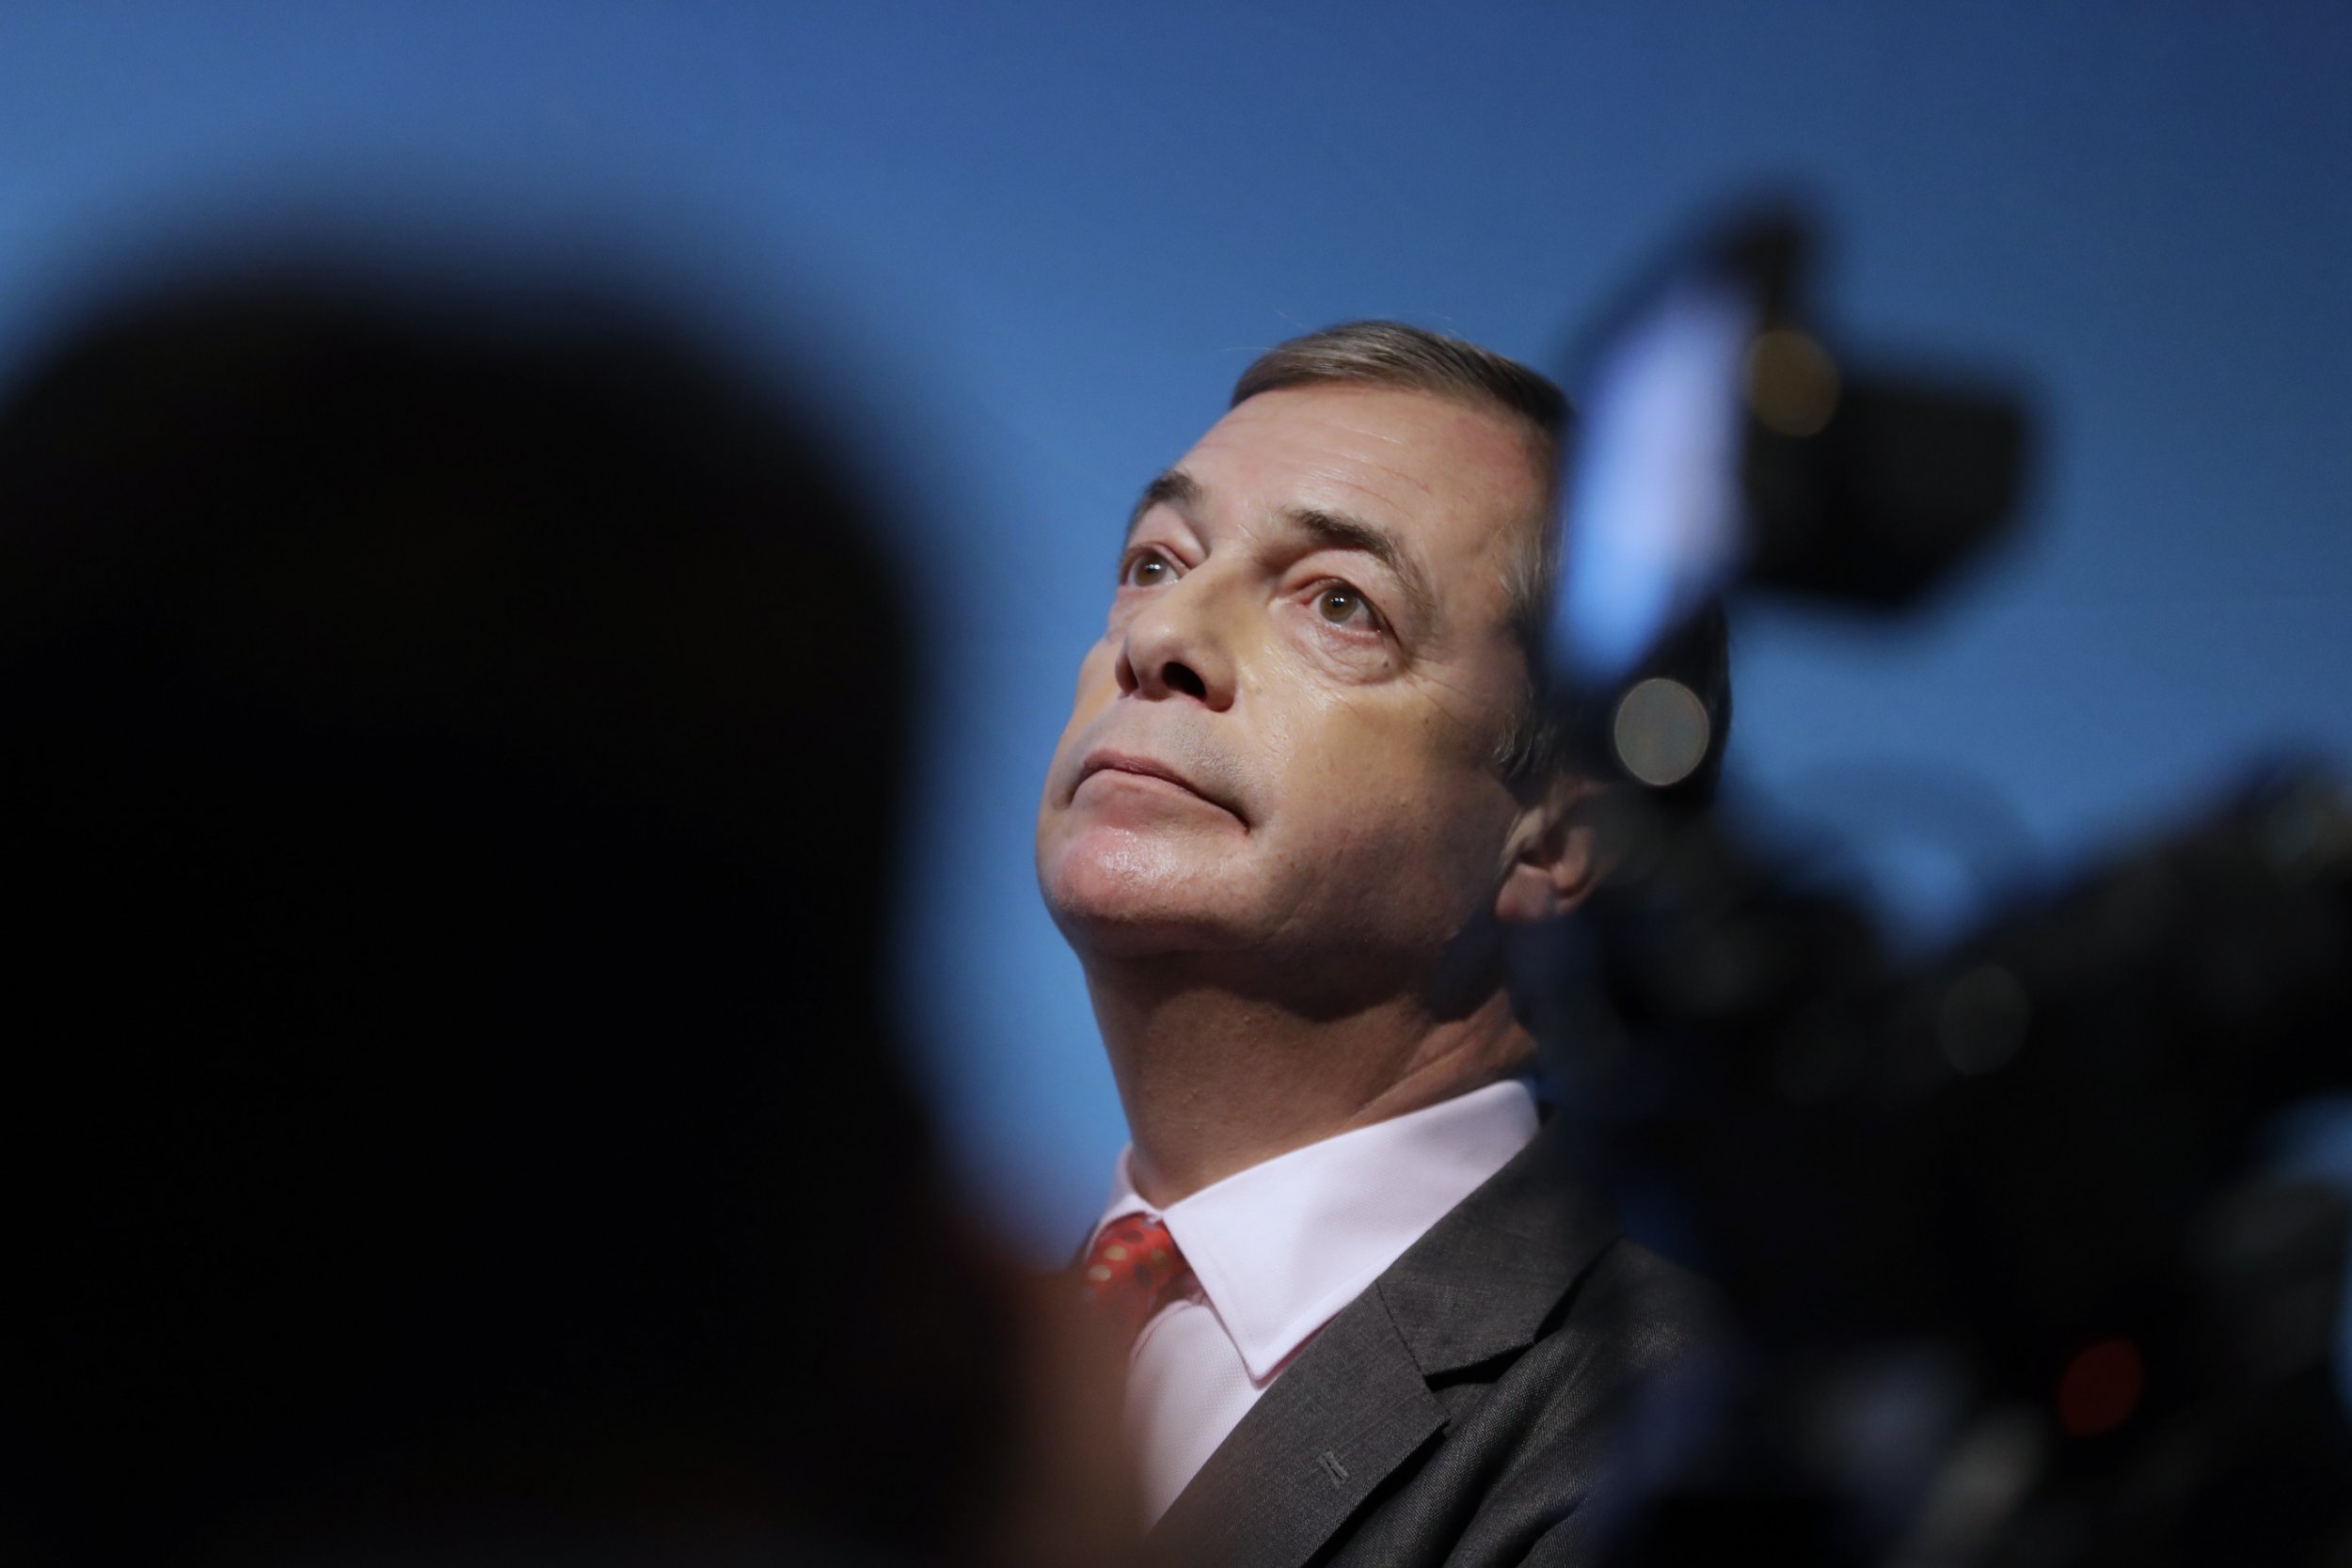 As Nigel Farage steps in, GB News counts the cost of crumbling principles